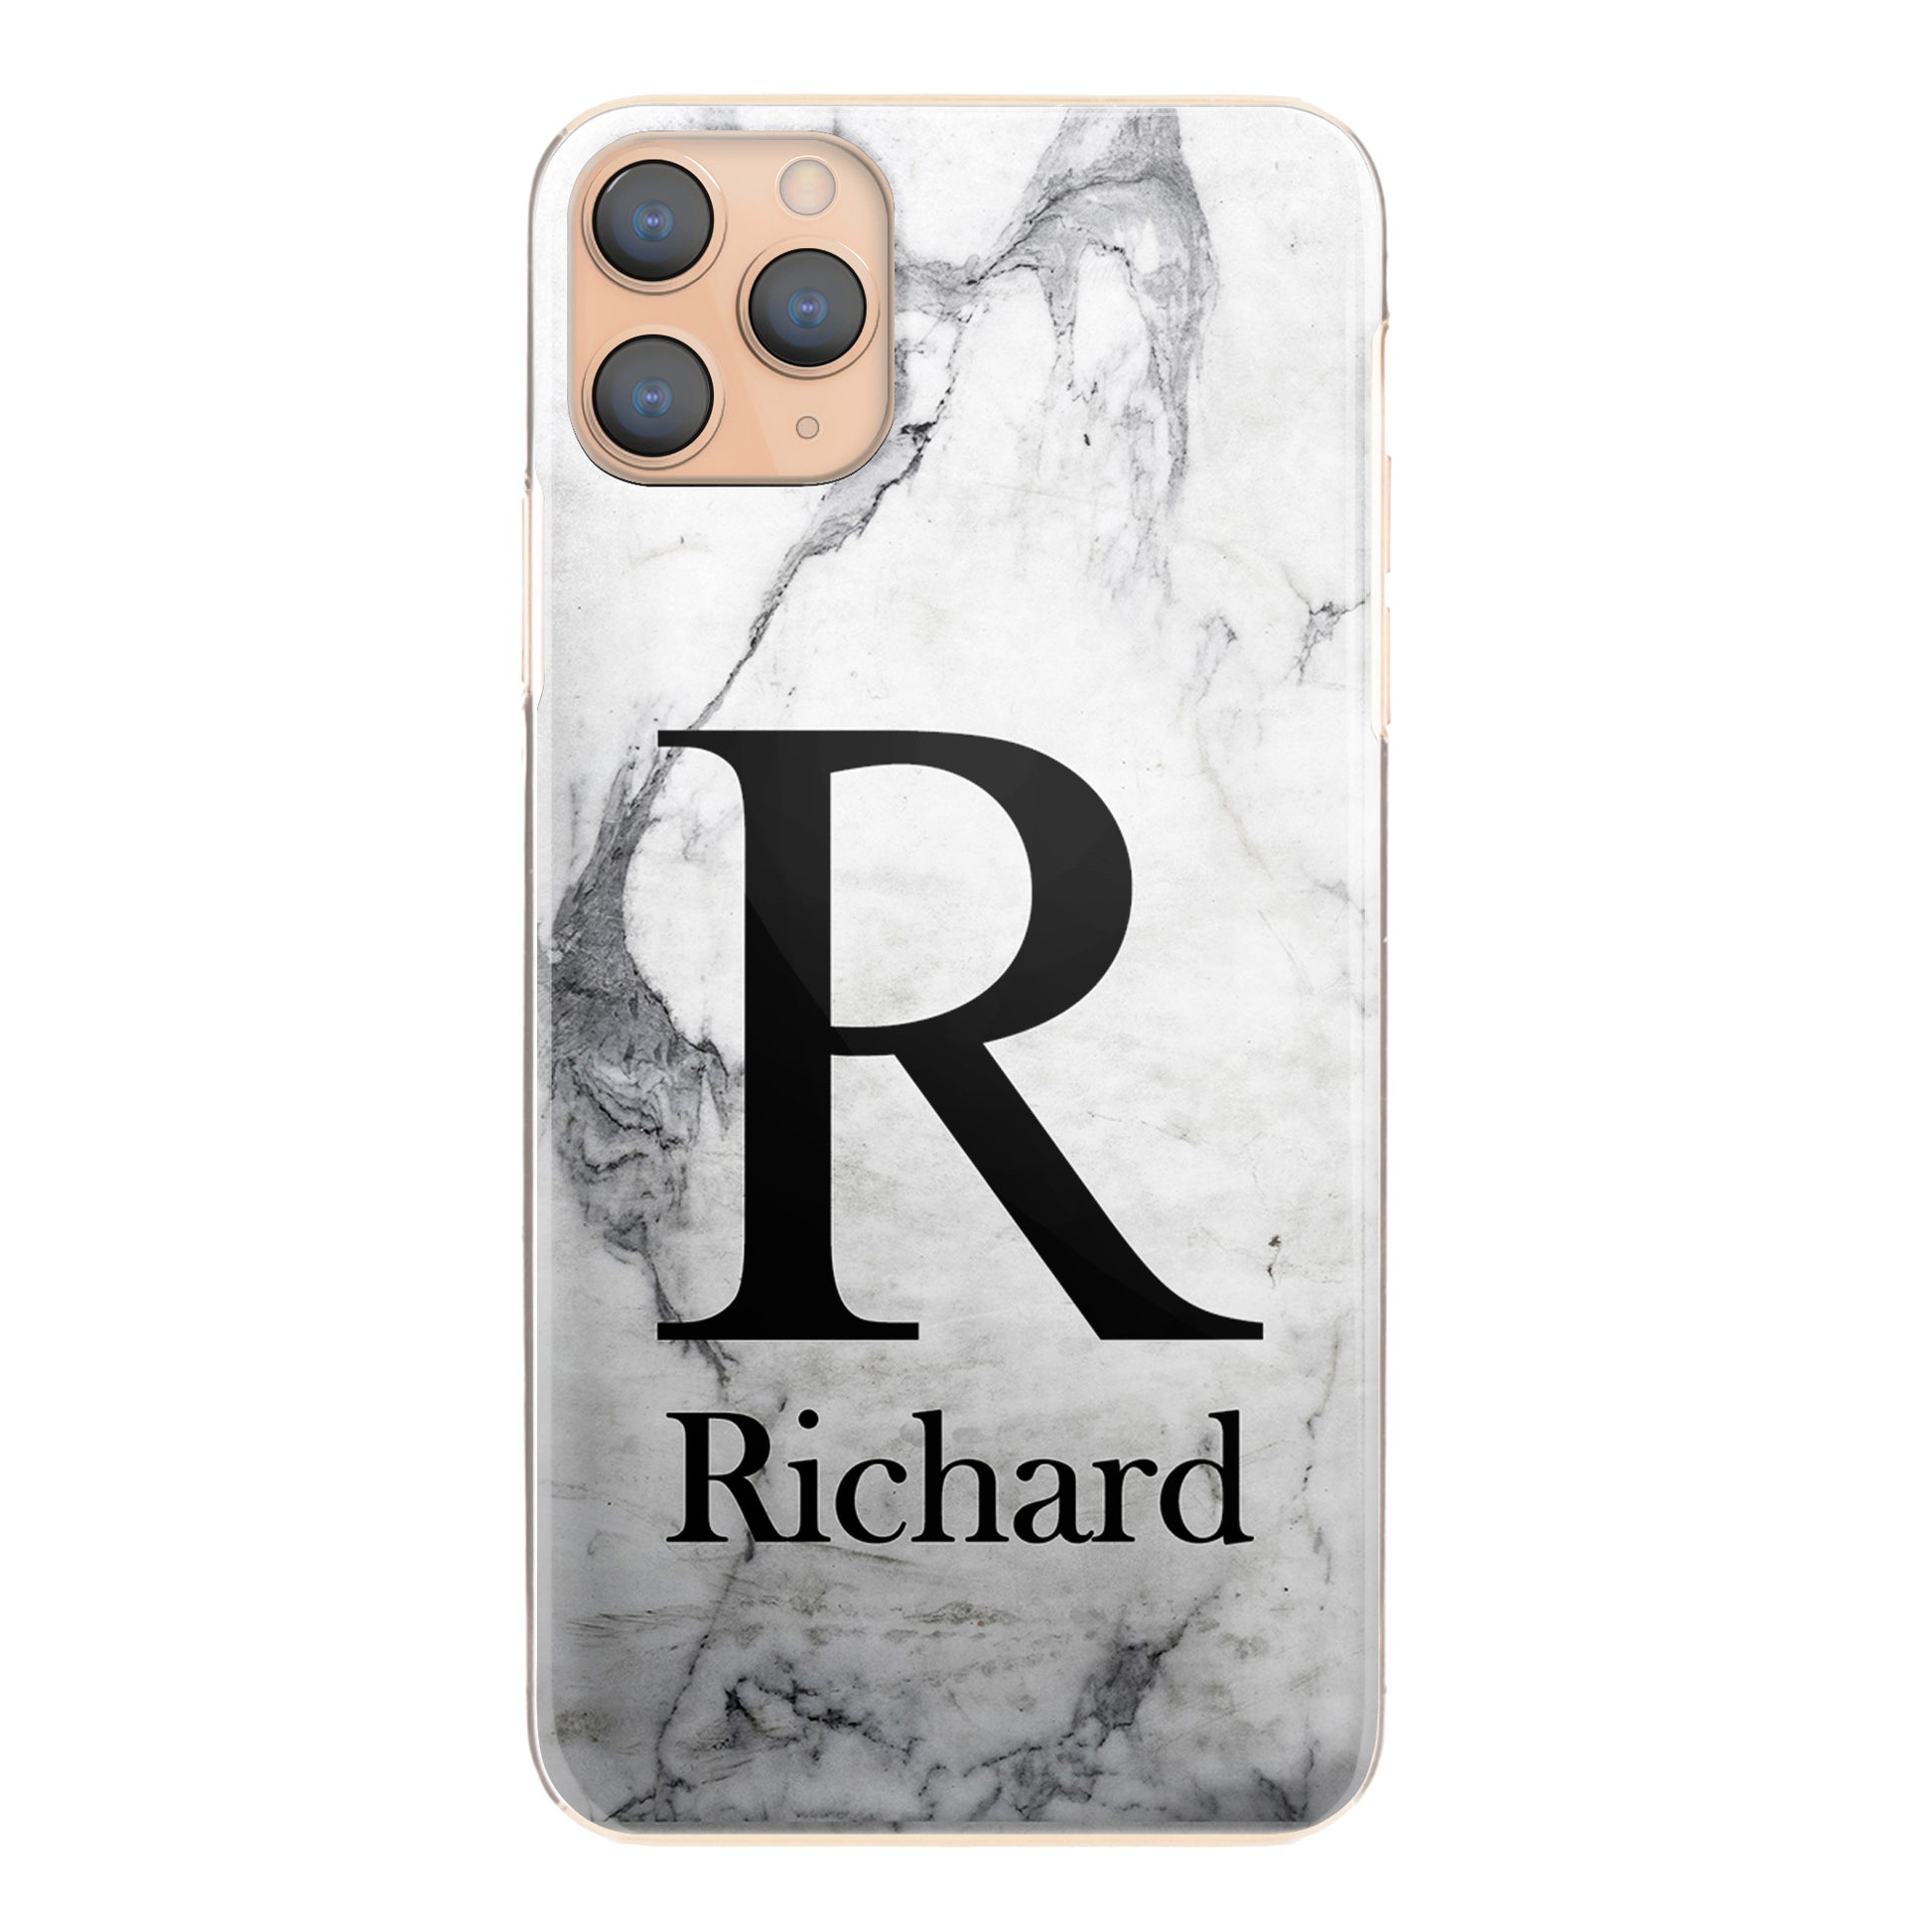 Personalised Xiaomi Phone Hard Case with Traditional Monogram and Text on Grey Marble